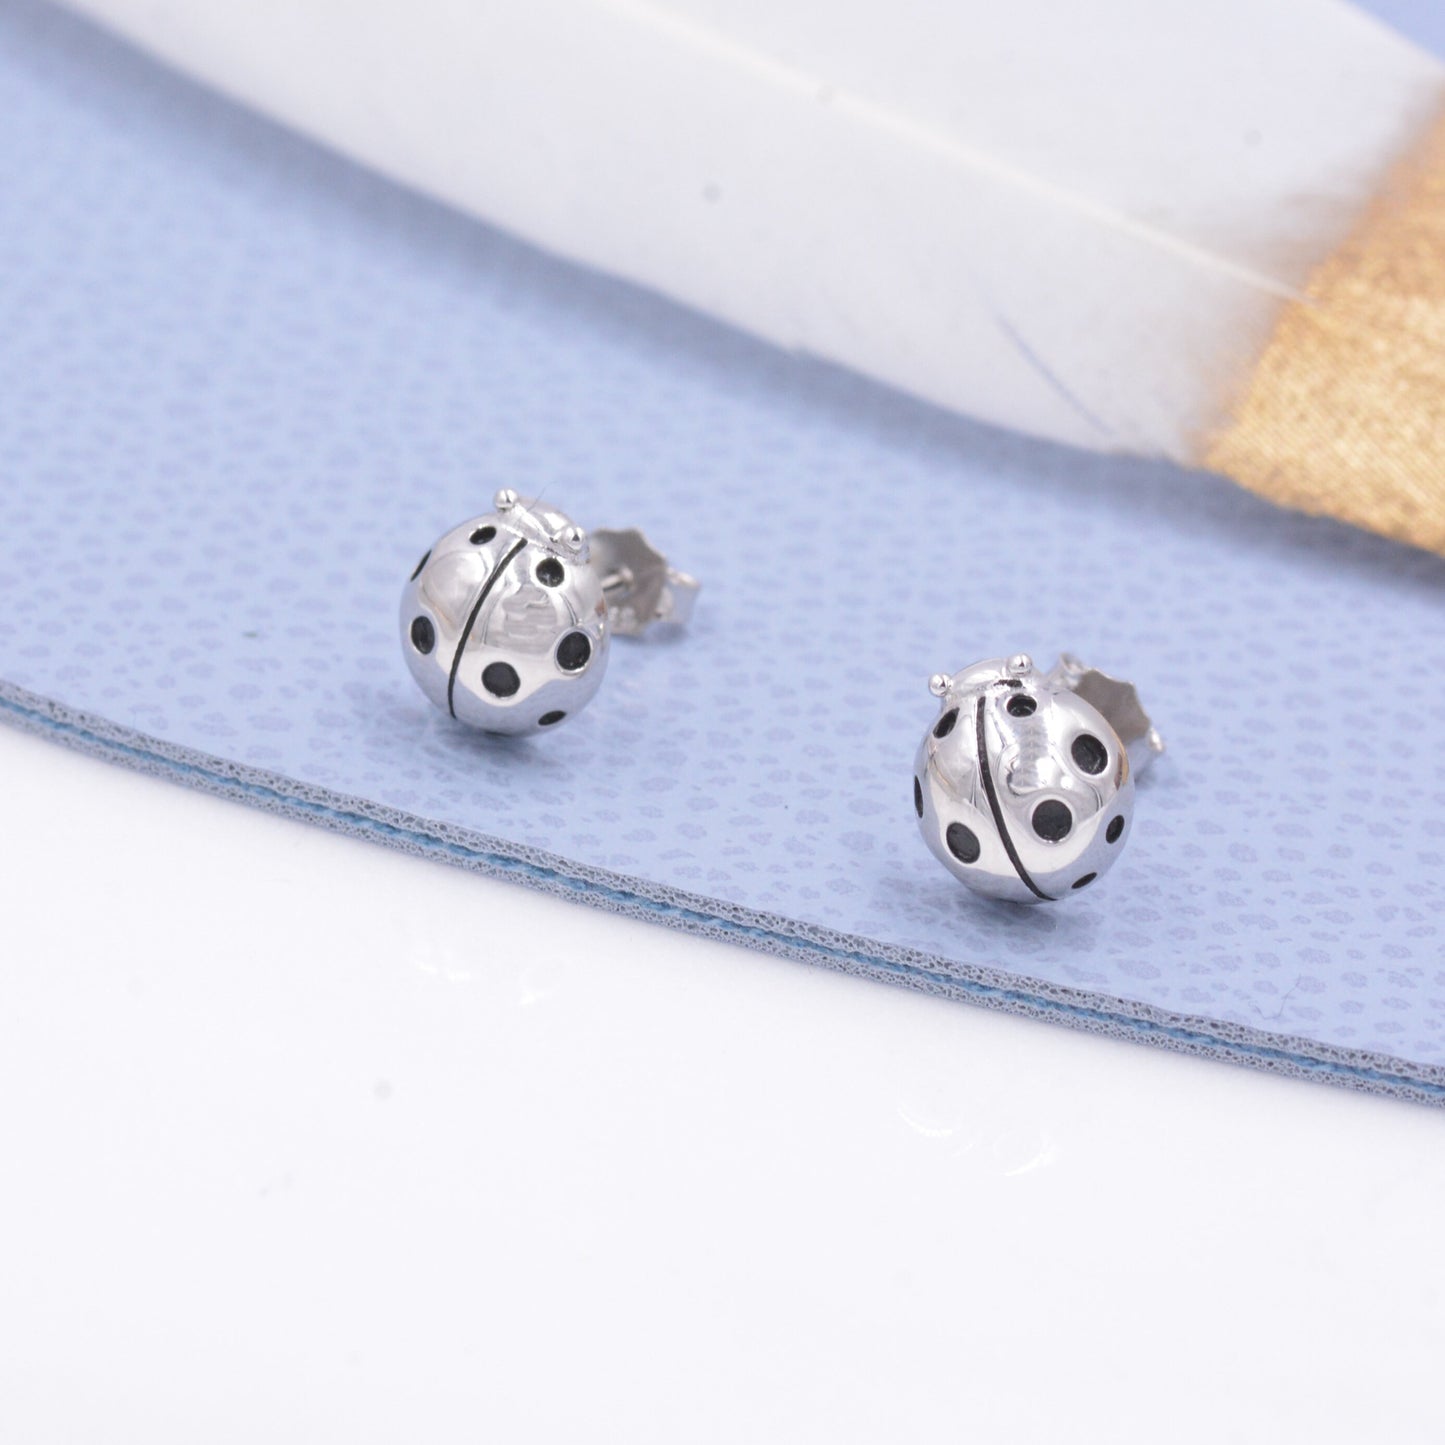 Sterling Silver Ladybird Stud Earrings, Animal Earrings, Cute and Quirky Q13